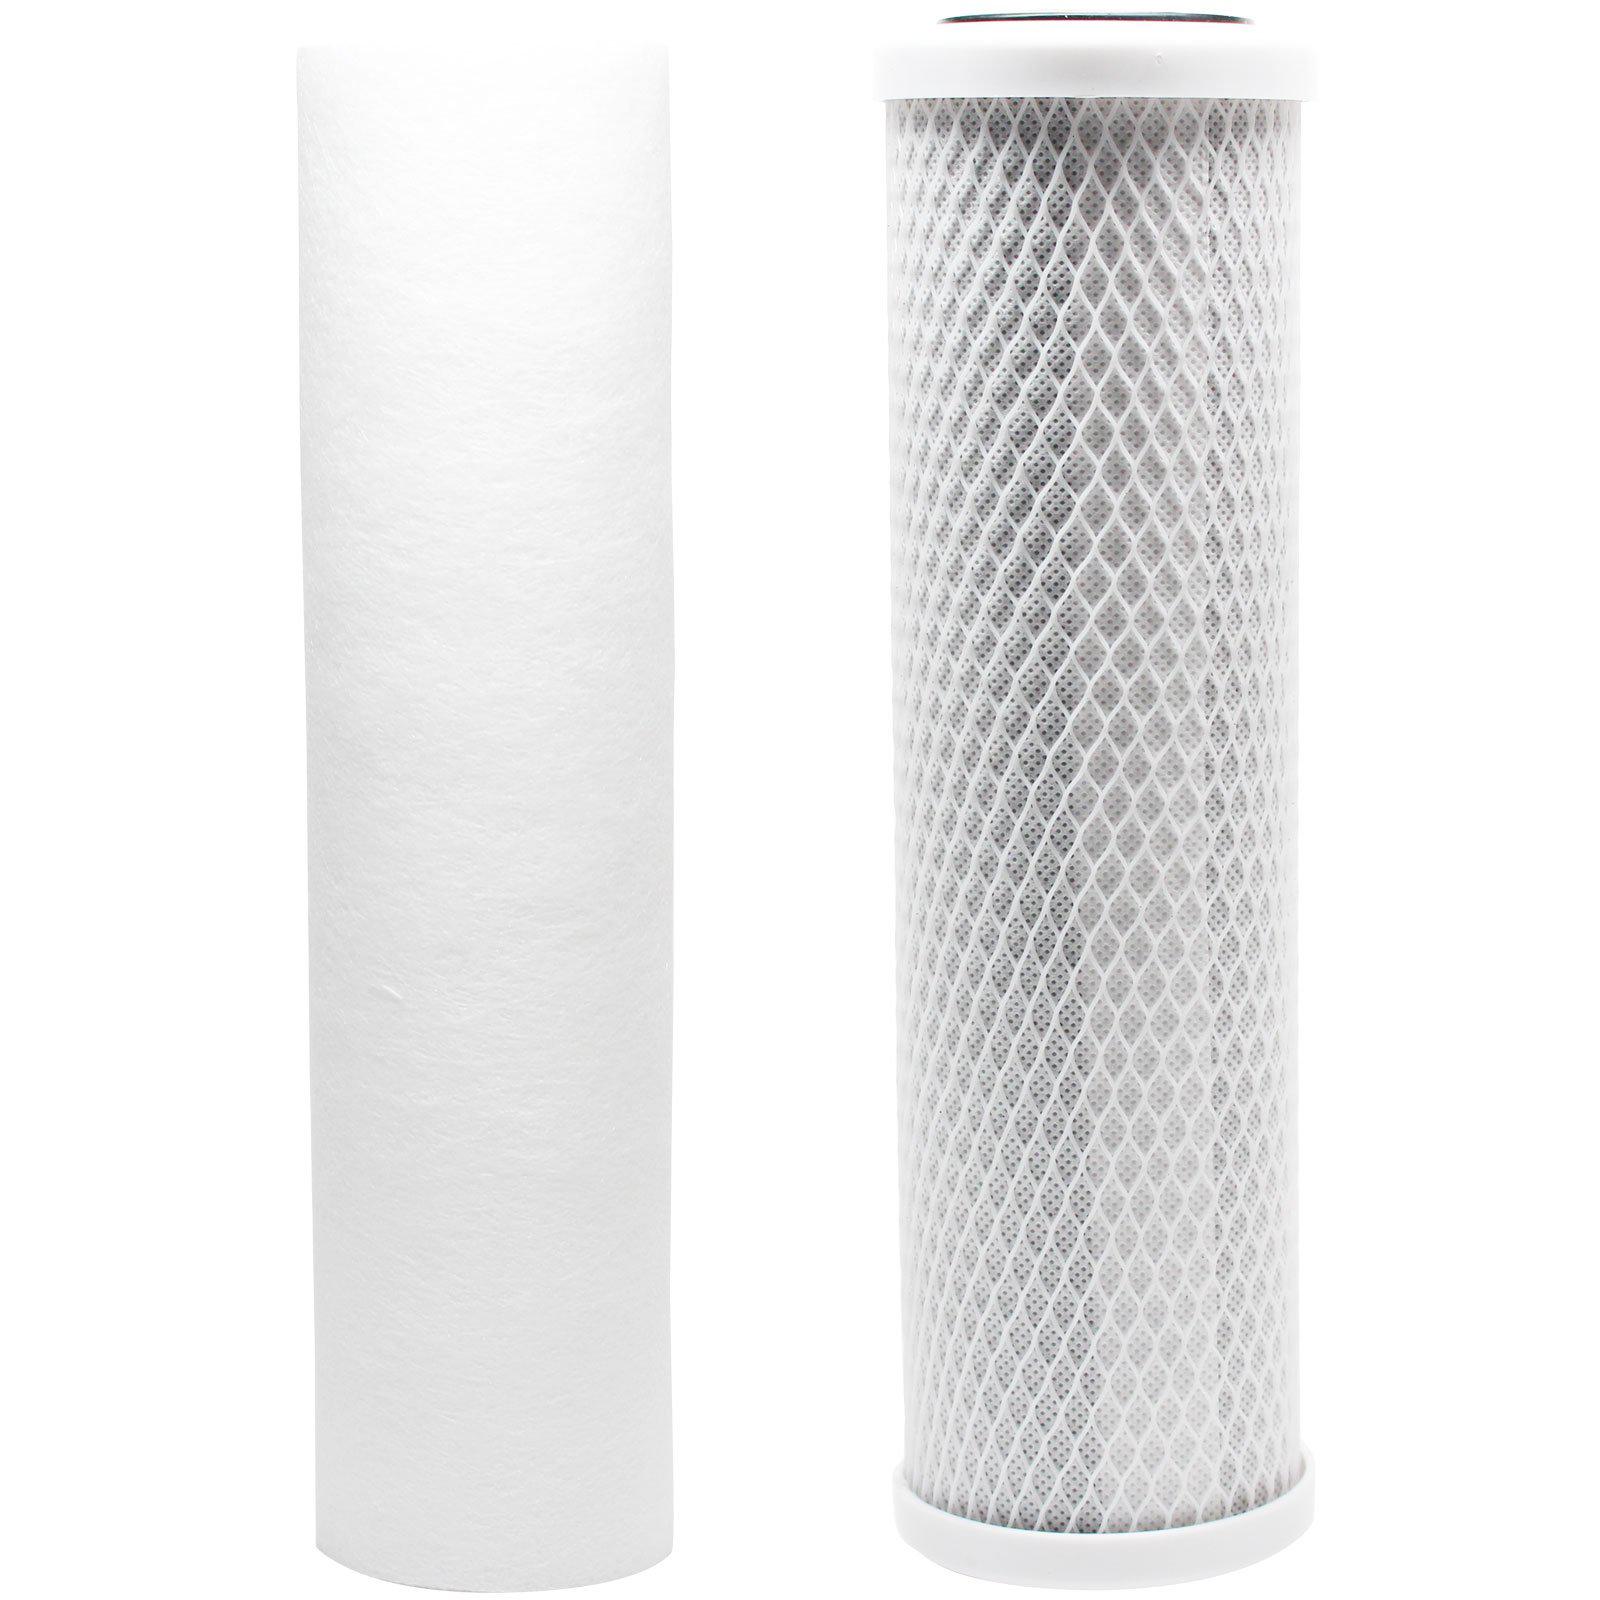 Denali Pure replacement filter kit compatible with omnifilter ot32 ro system - includes carbon block filter & pp sediment filter - denali